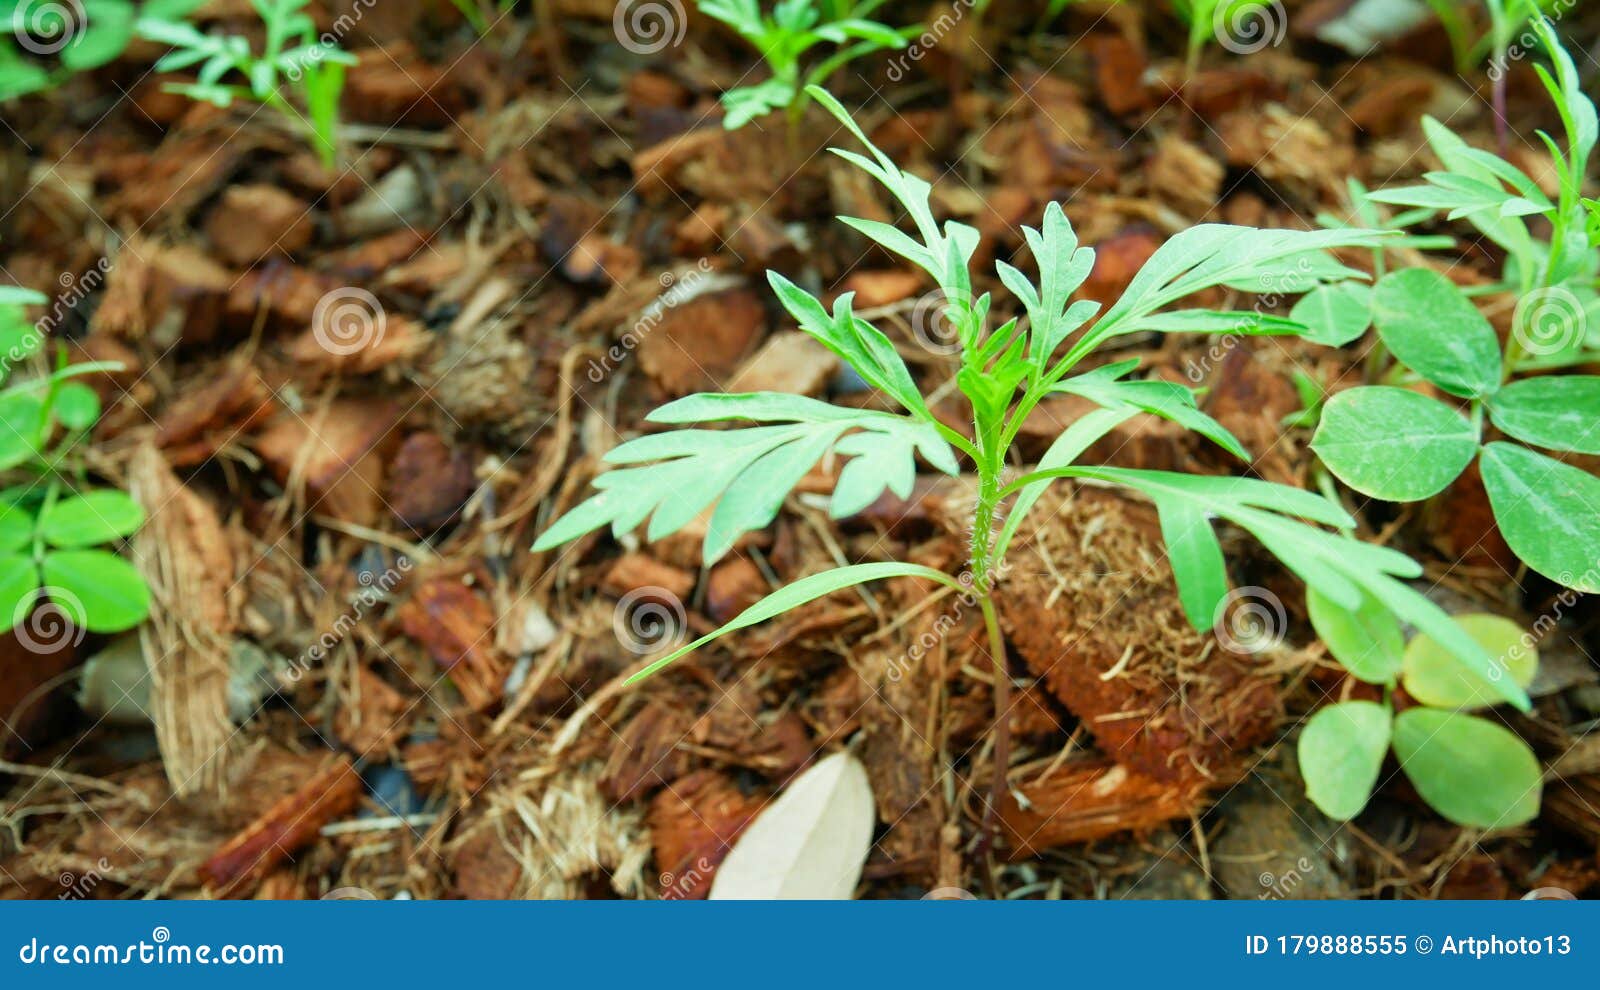 Top View Small Young Seedlings Marigold Plants Farming Floral Garden Organic Concept Stock Image Image Of Agriculture Agricultural